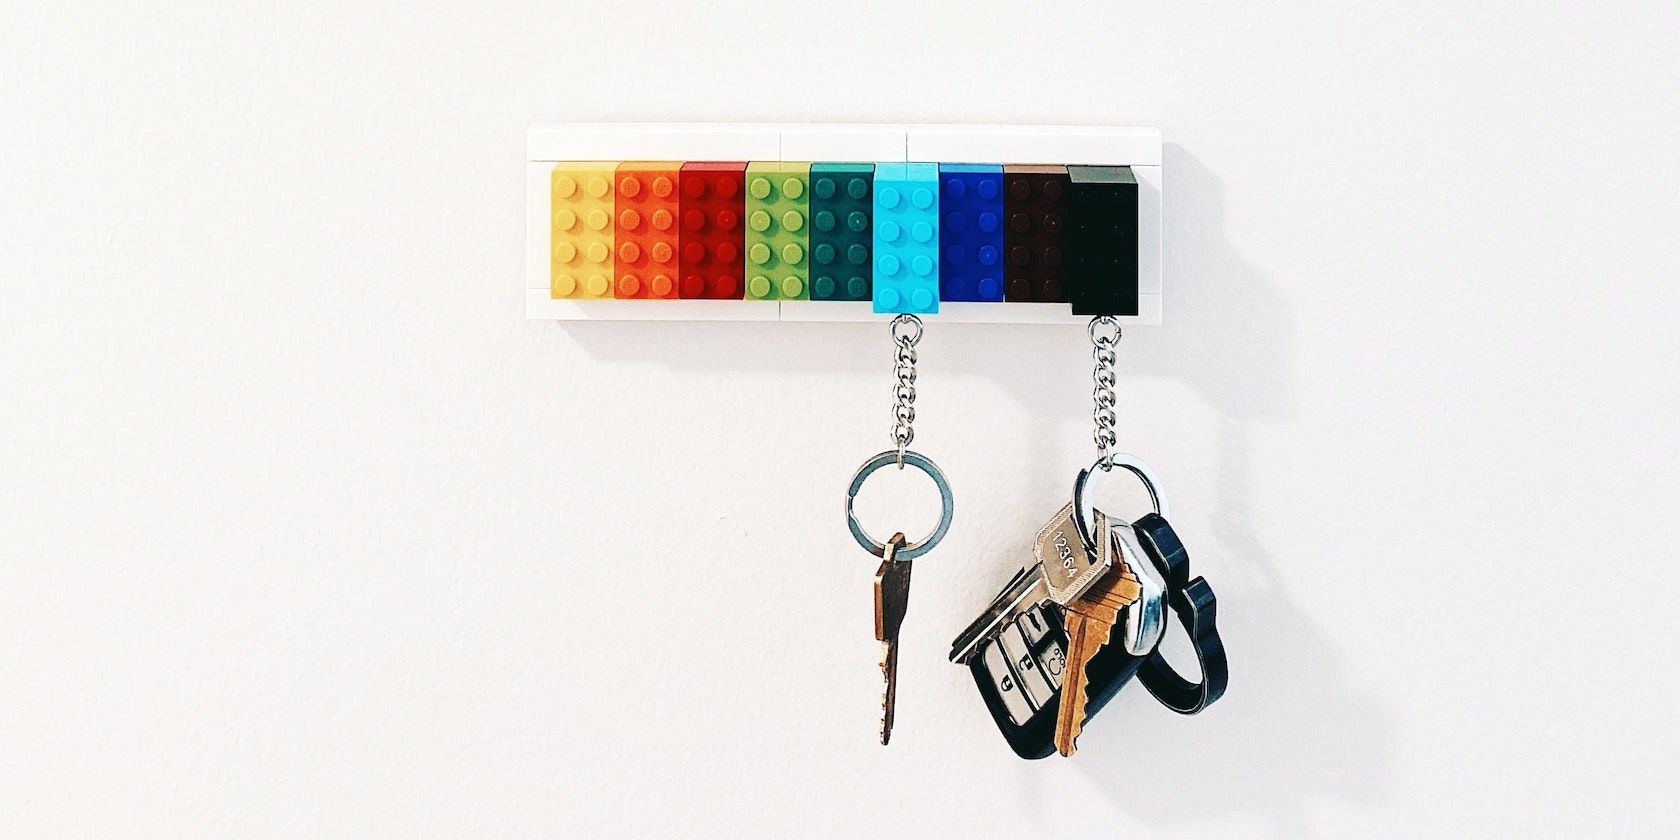 Keychains with keys on them hang on a wall